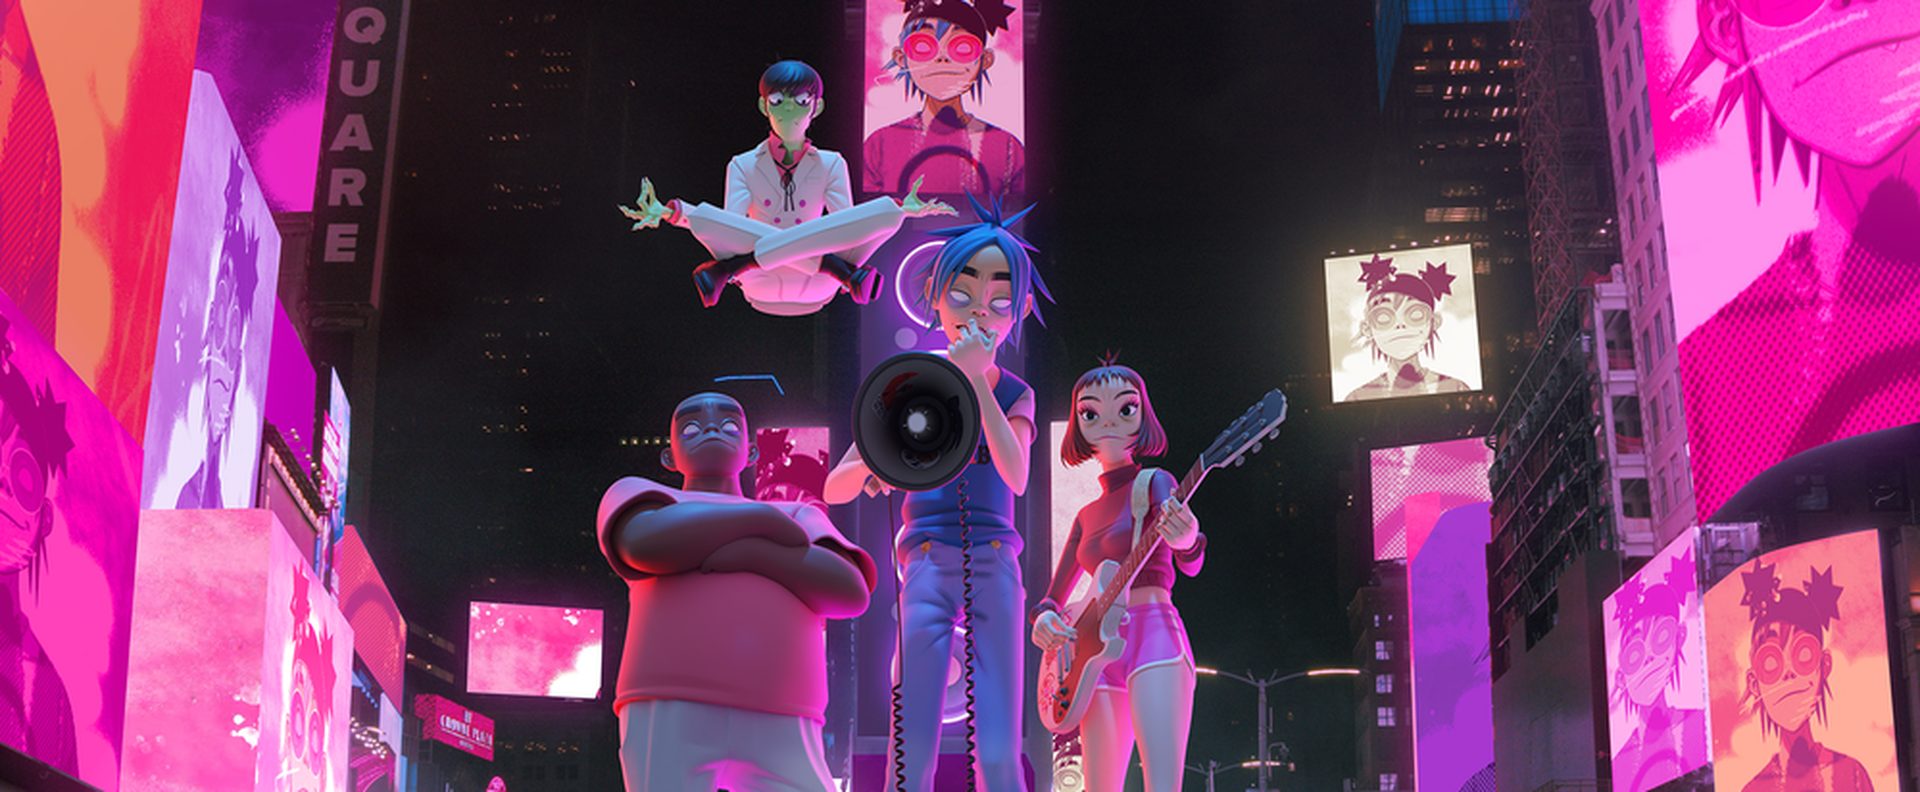 Google-powered Gorillaz augmented reality concerts took over NYC and London - Dataconomy